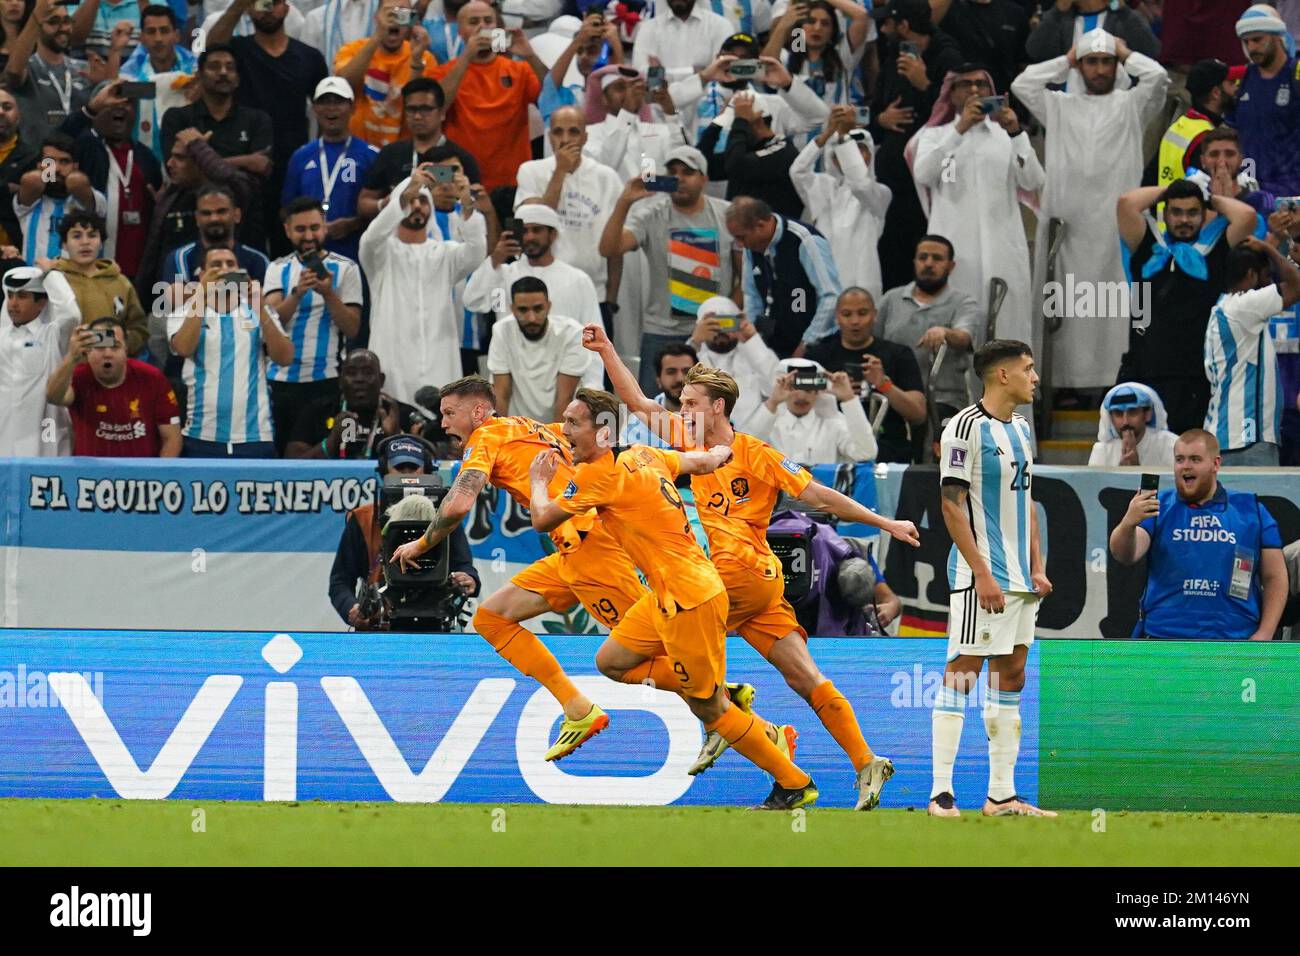 LUSAIL, QATAR - DECEMBER 9: Weghorst Wout of Netherlands celebrates after scoring a goal with the team during the FIFA World Cup Qatar 2022 quarter final match between Netherlands and Argentina at Lusail Stadium on December 09, 2022 in Lusail, Qatar. (Photo by FlorenciaTan Jun/Pximages) Credit: Px Images/Alamy Live News Stock Photo